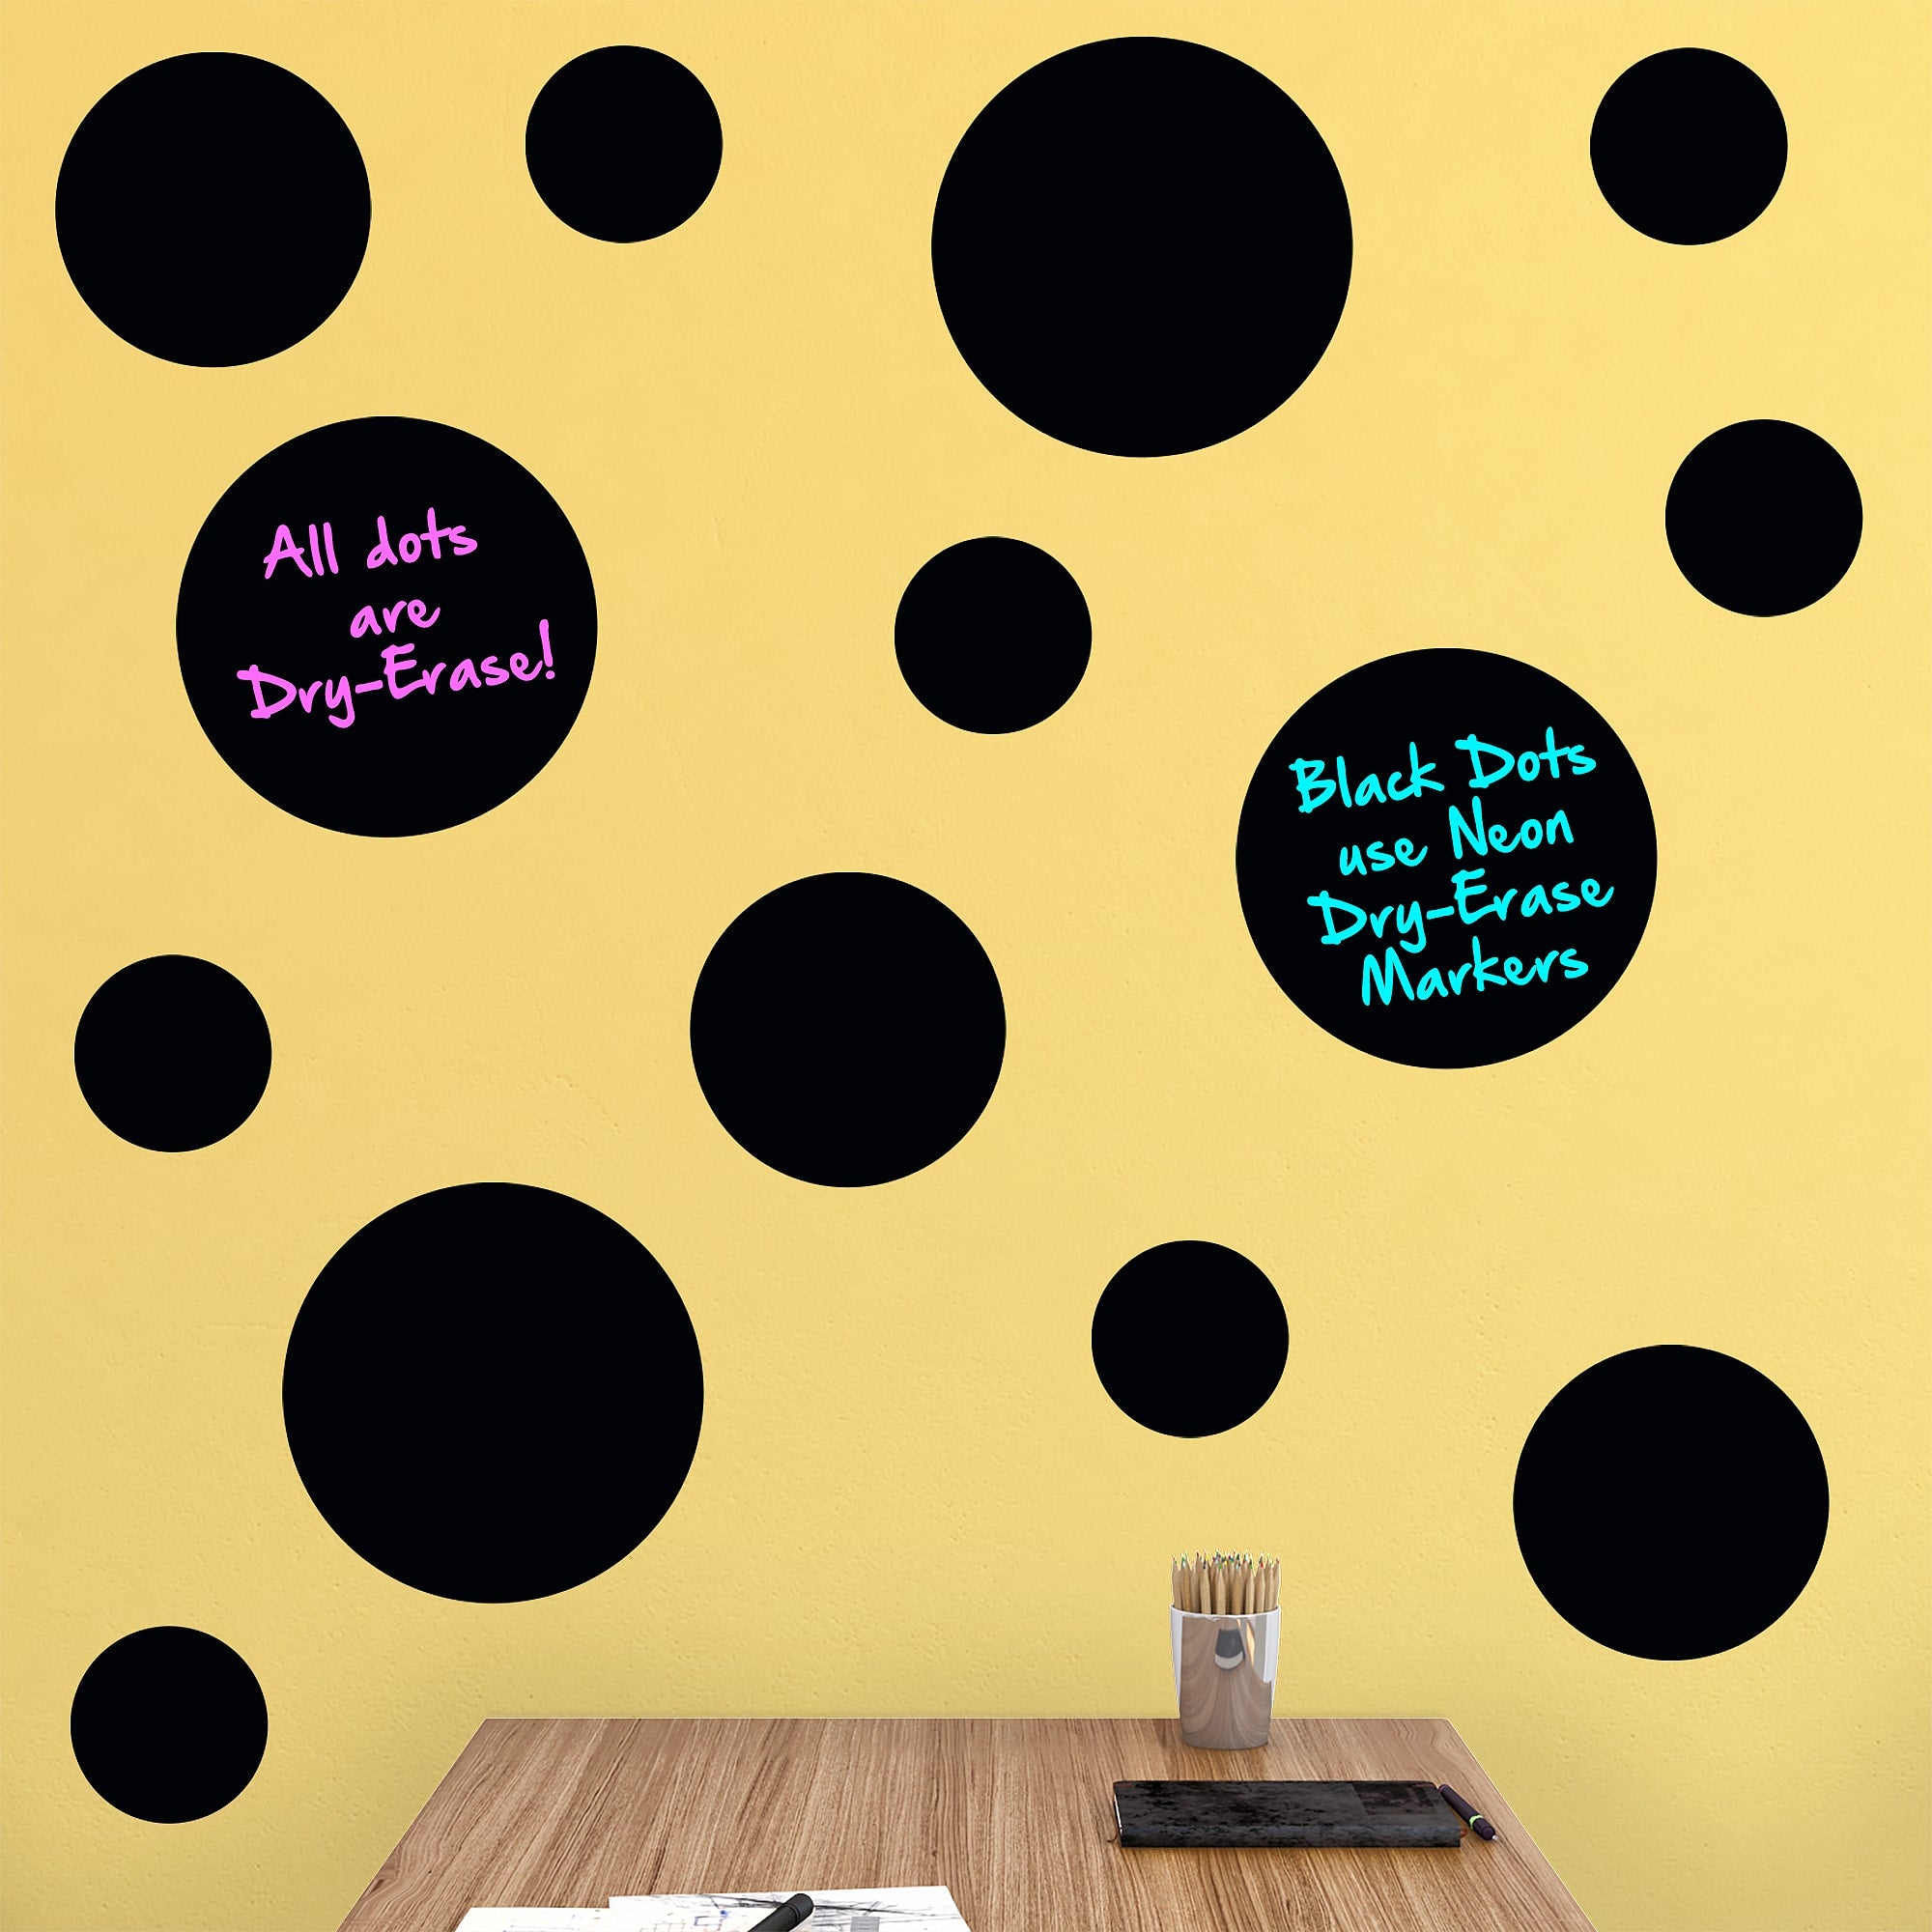 Black Dry Erase Message Dots Removable Wall Decal Life-Size Decal by Fathead | Vinyl